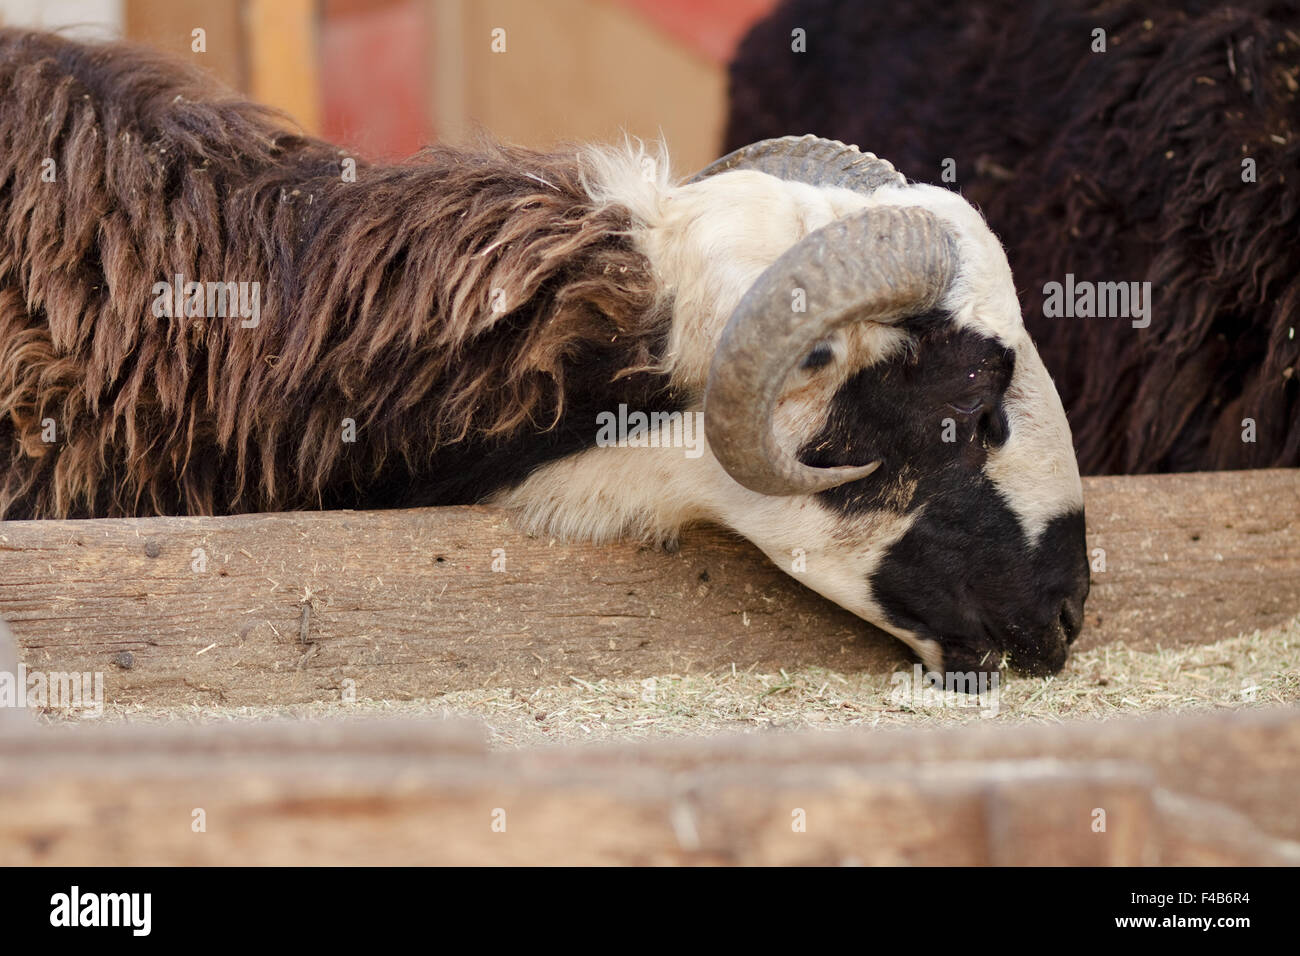 Sheep goat with eat in the trough Stock Photo